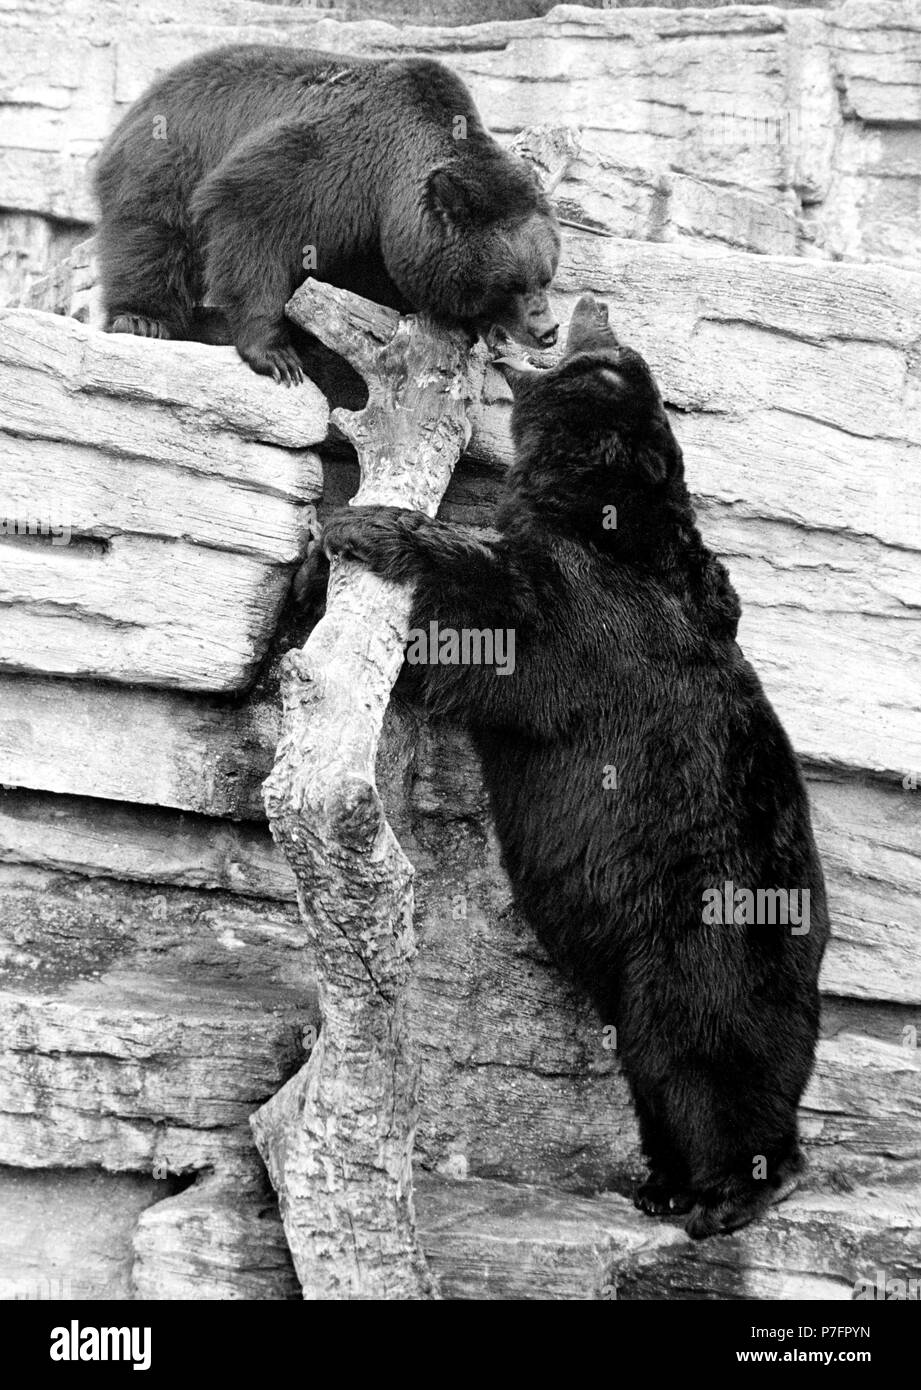 Two bears fighting at the wall, ca. 1970s, exact place unknown, Austria Stock Photo